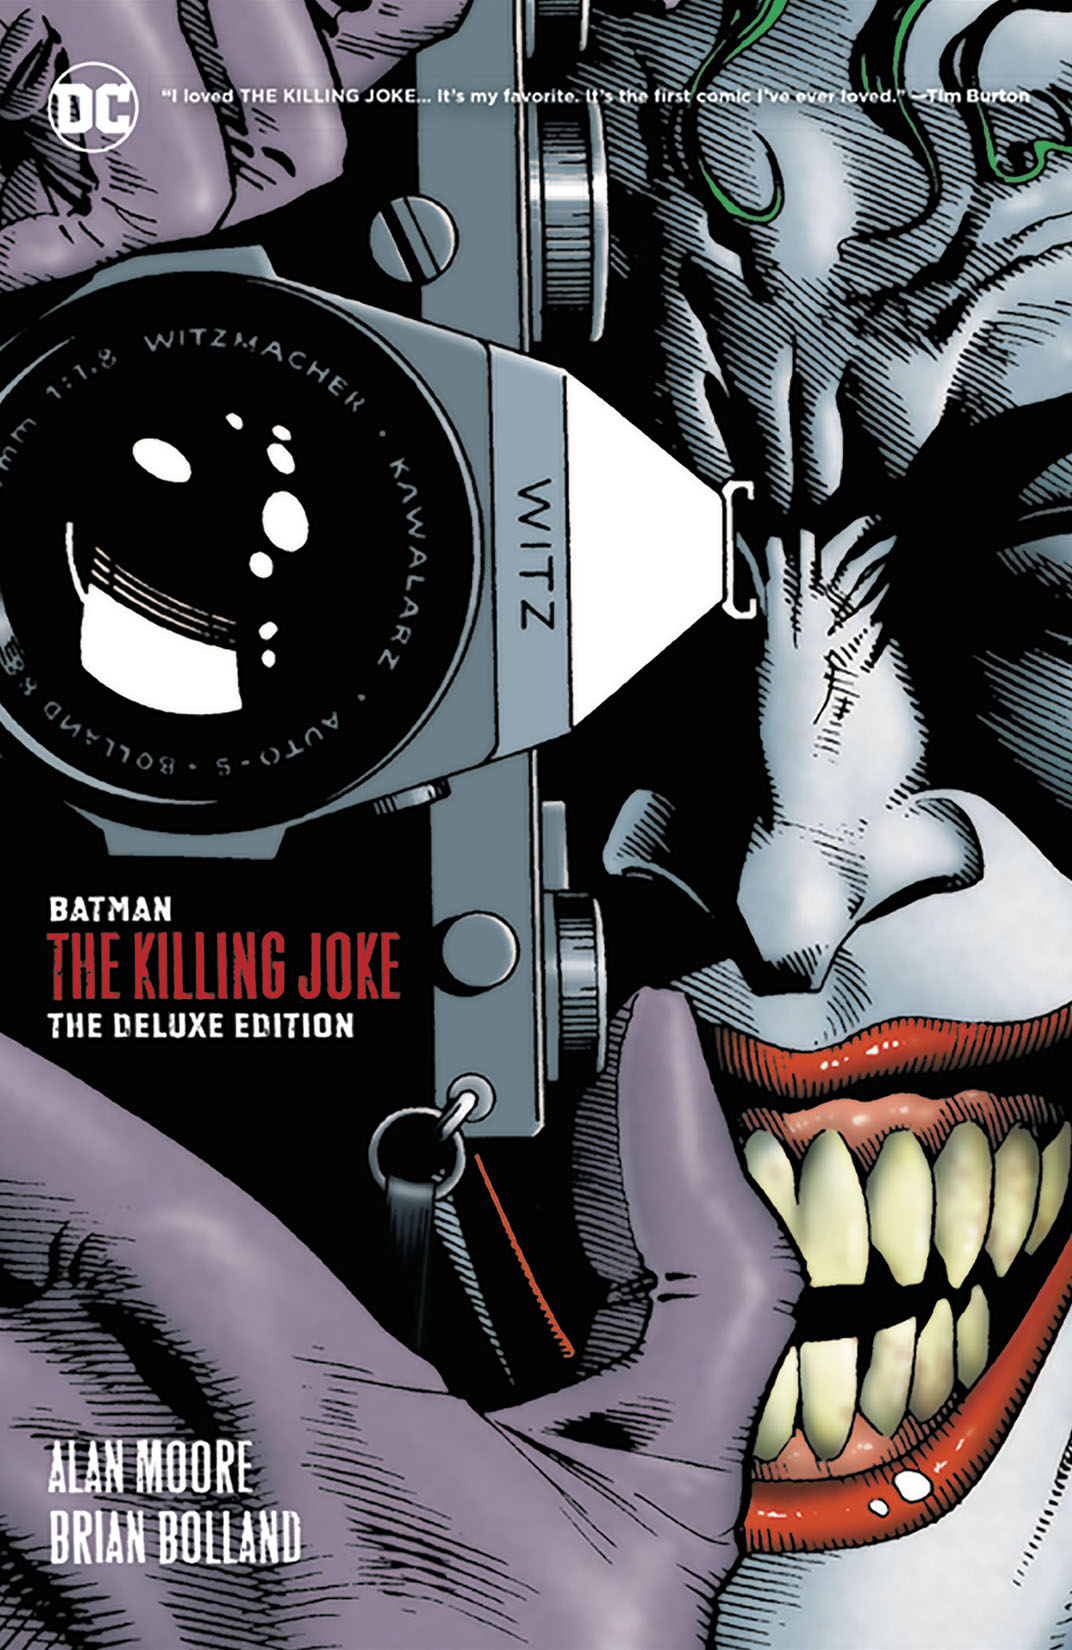 Batman: The Killing Joke Deluxe (New Edition) preview images